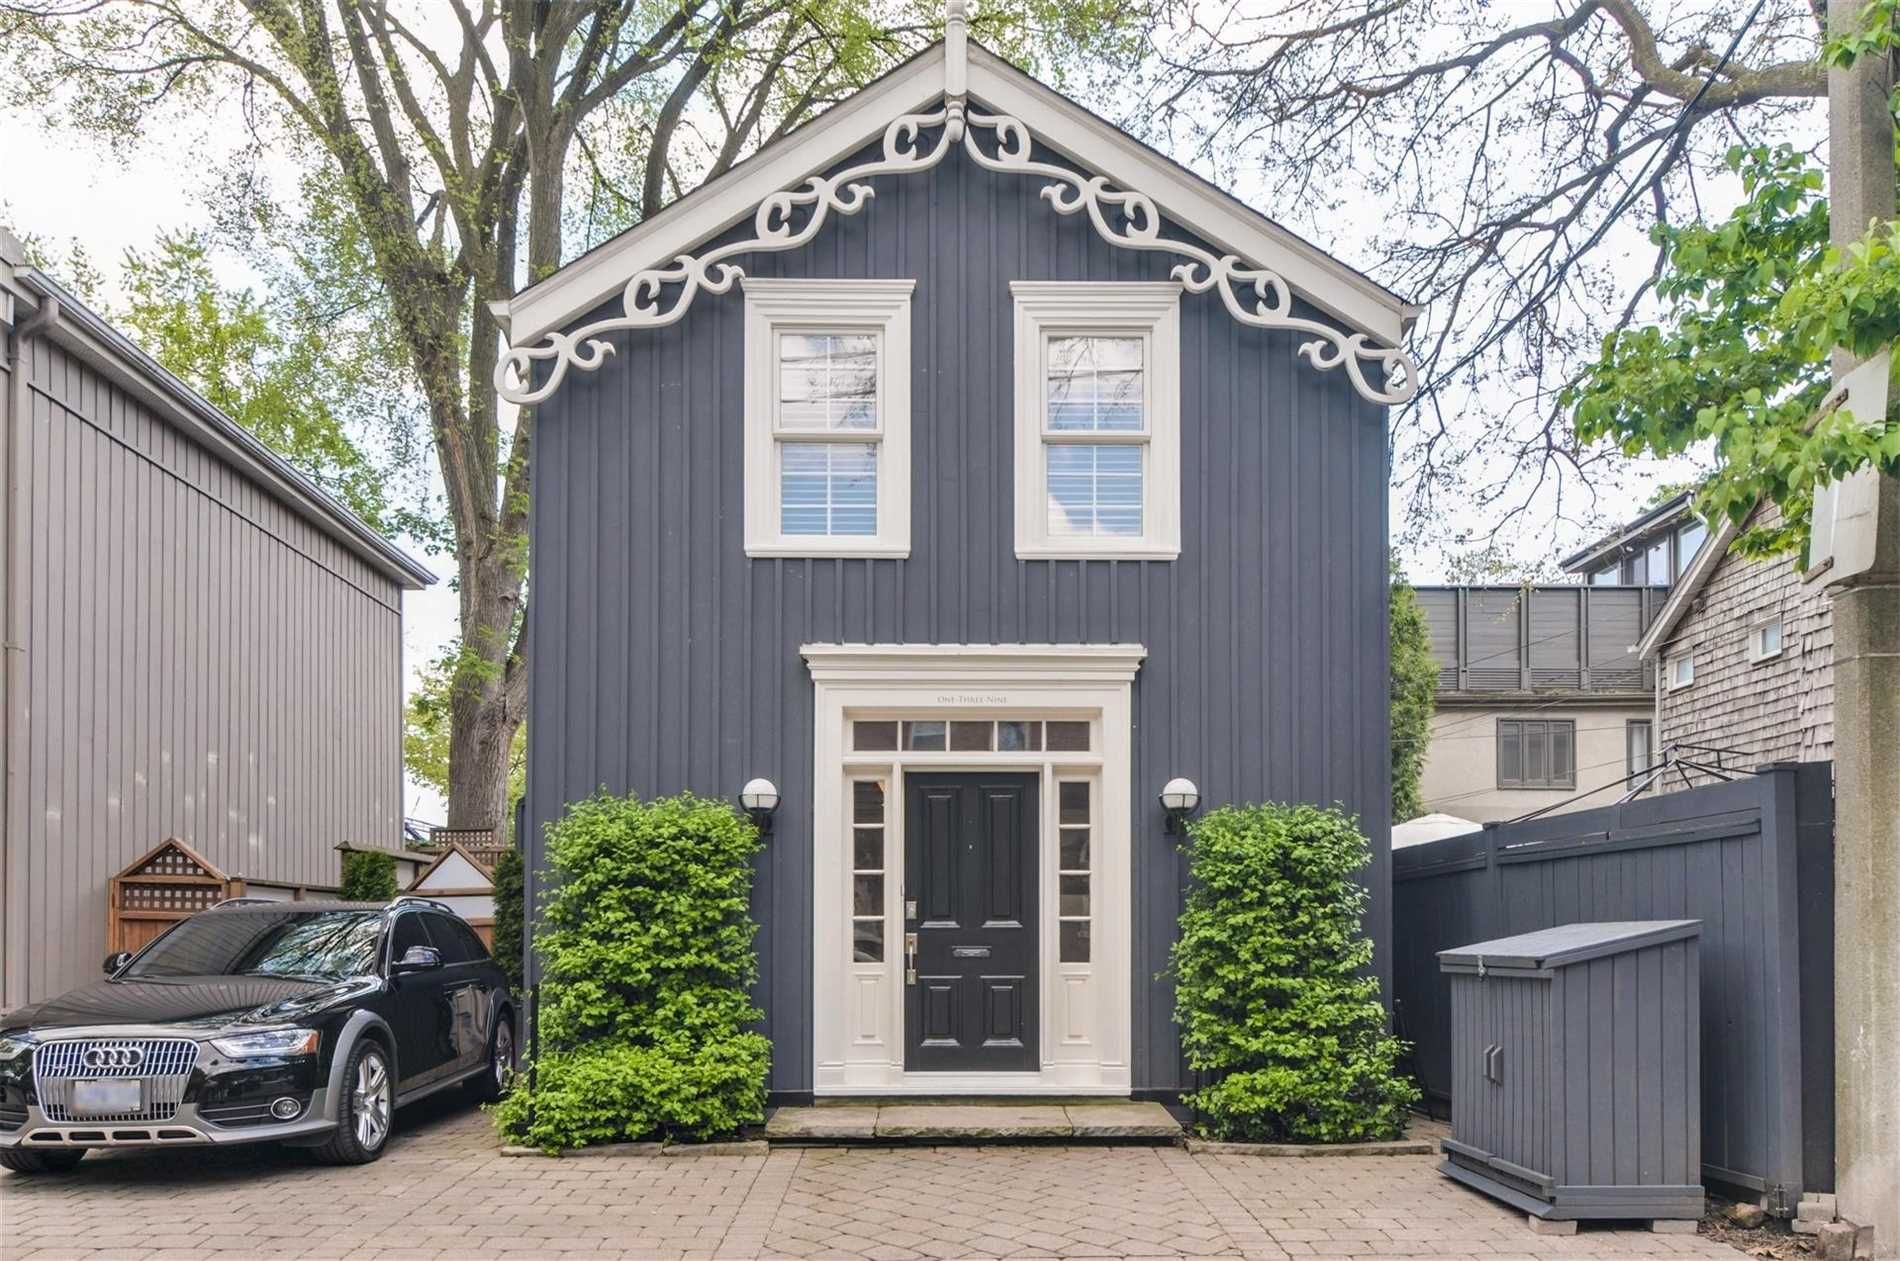 Main Photo: 139 Spruce Street in Toronto: Cabbagetown-South St. James Town House (2-Storey) for sale (Toronto C08)  : MLS®# C4466619